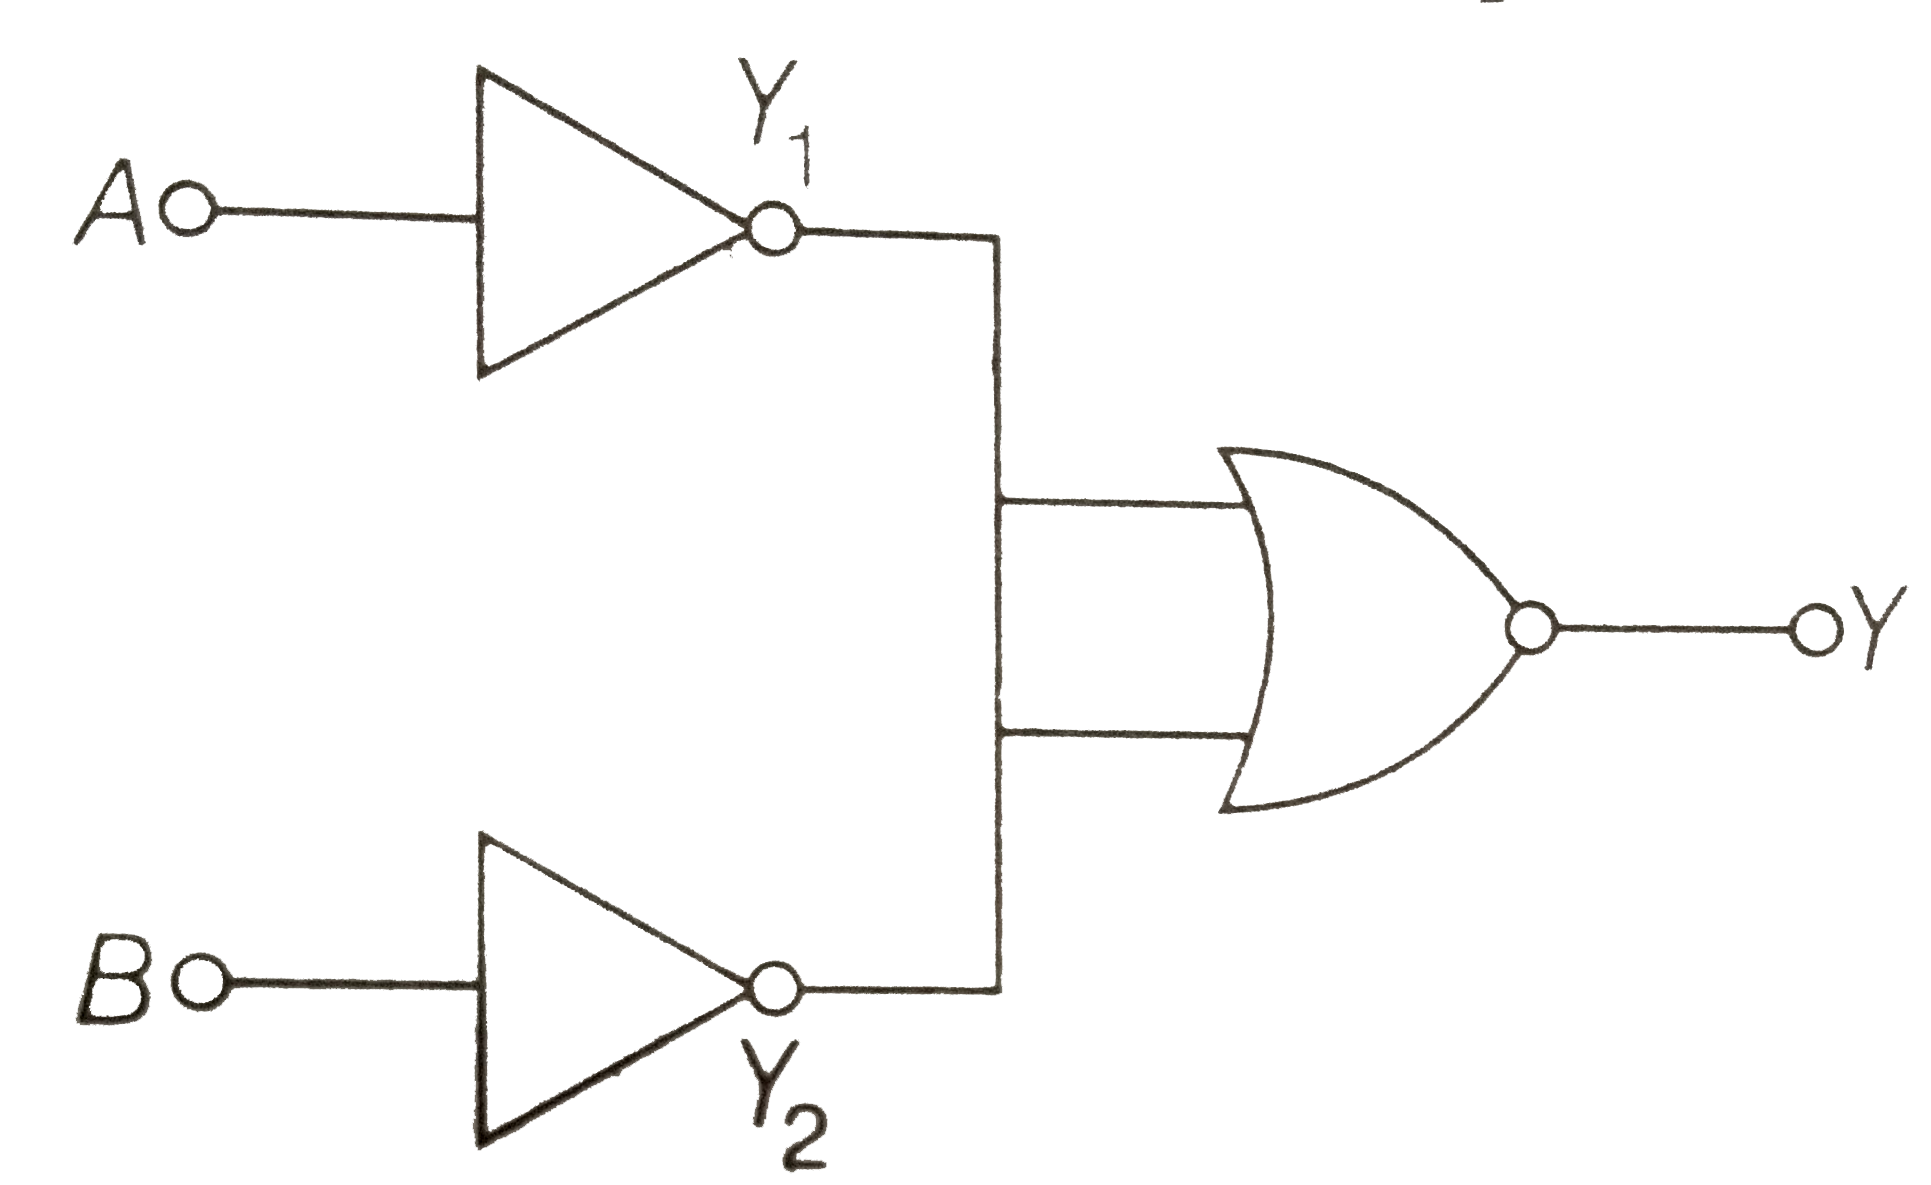 Which logic gate is represented by the following combination of logic gates?